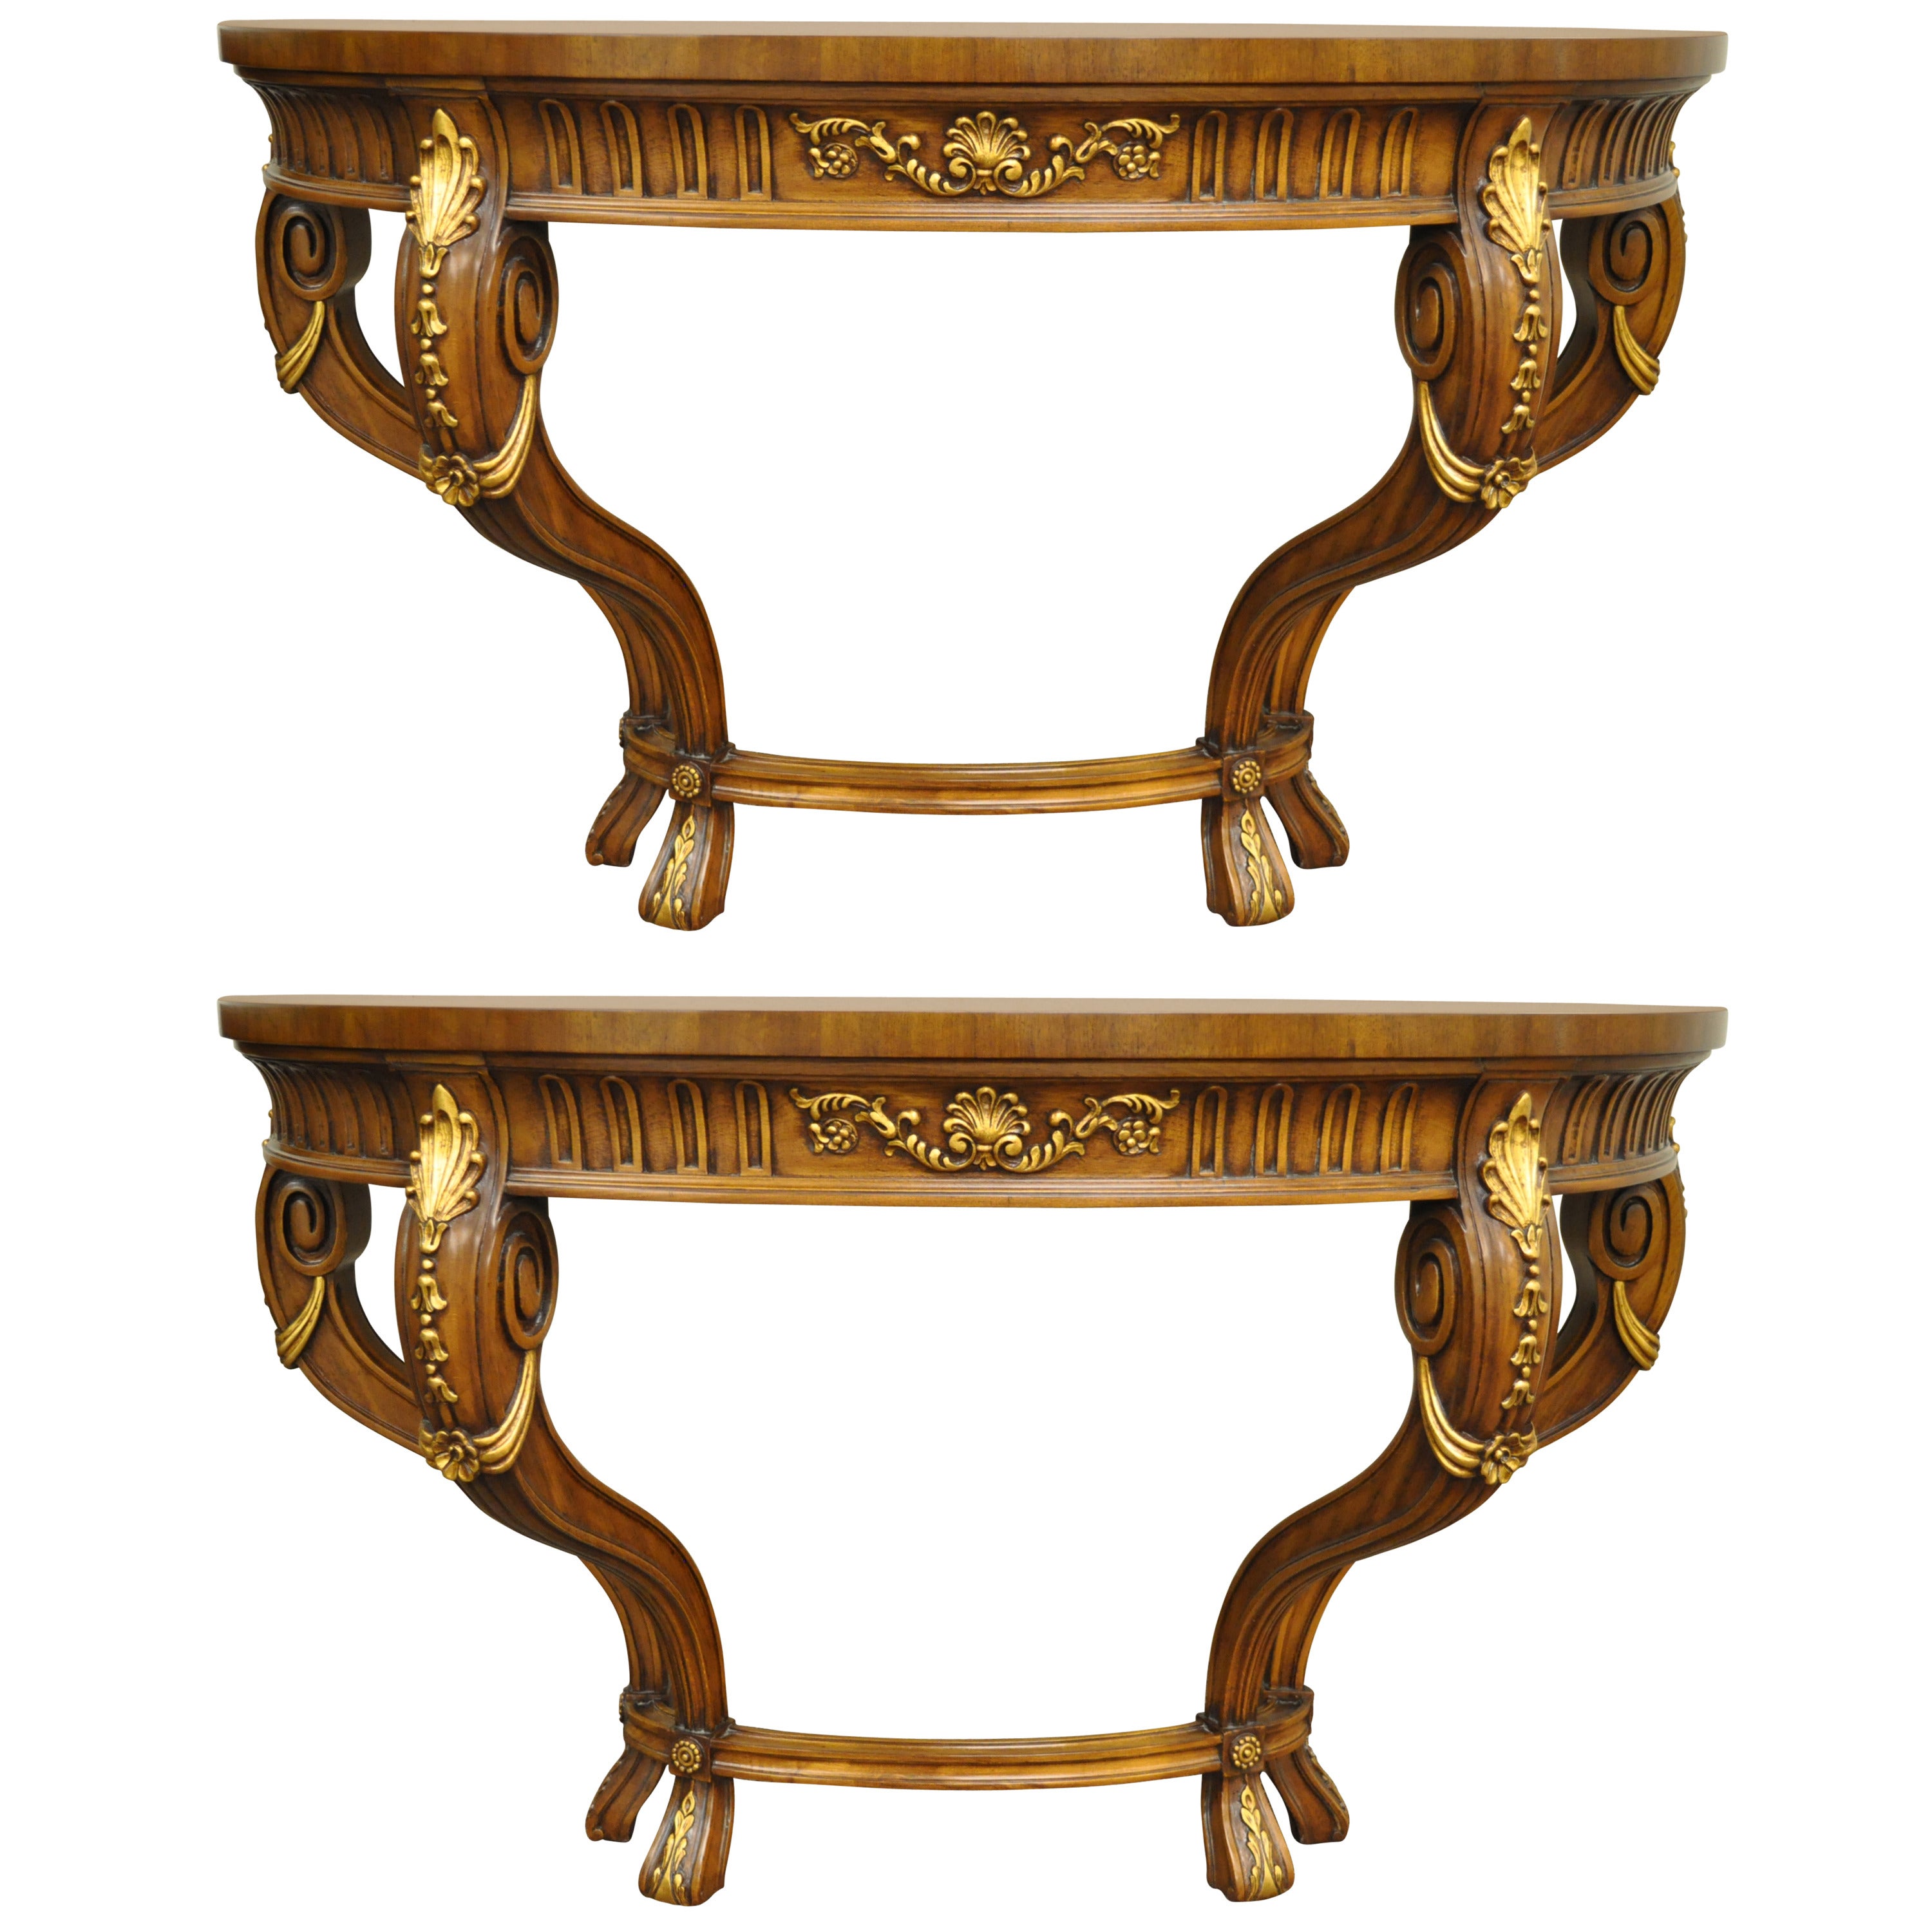 Pair of Karges Demilune Wall Mounted Consoles in the French Louis XV Taste